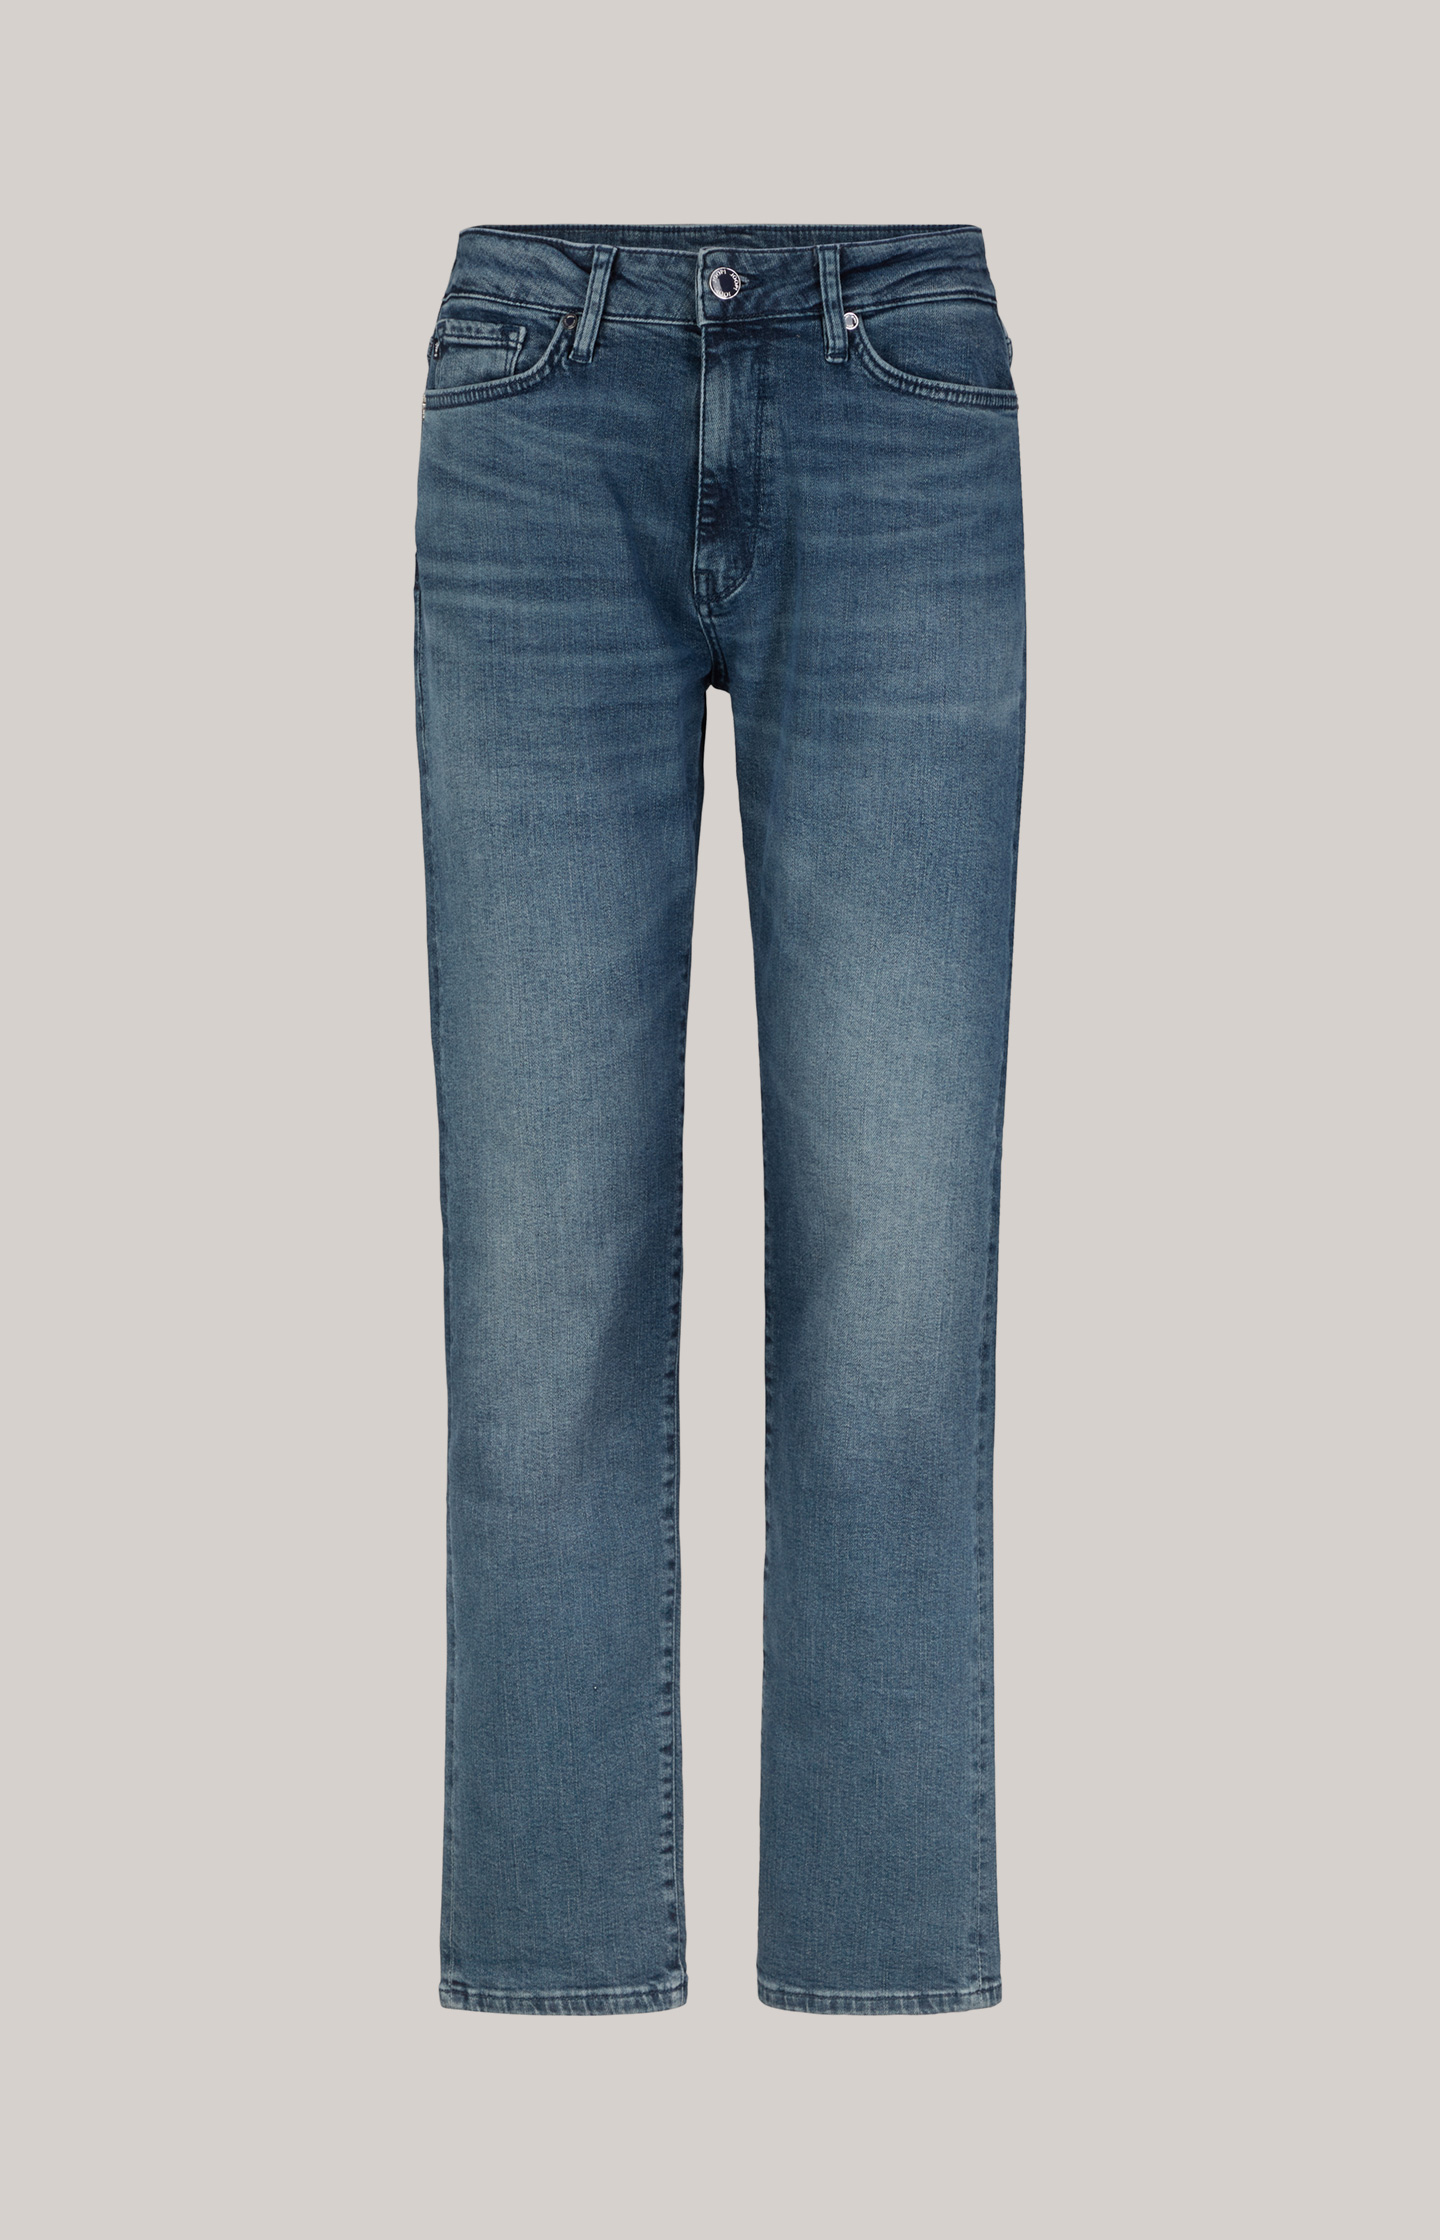 Jeans in a Denim JOOP! in Online Shop Washed Look Blue the 